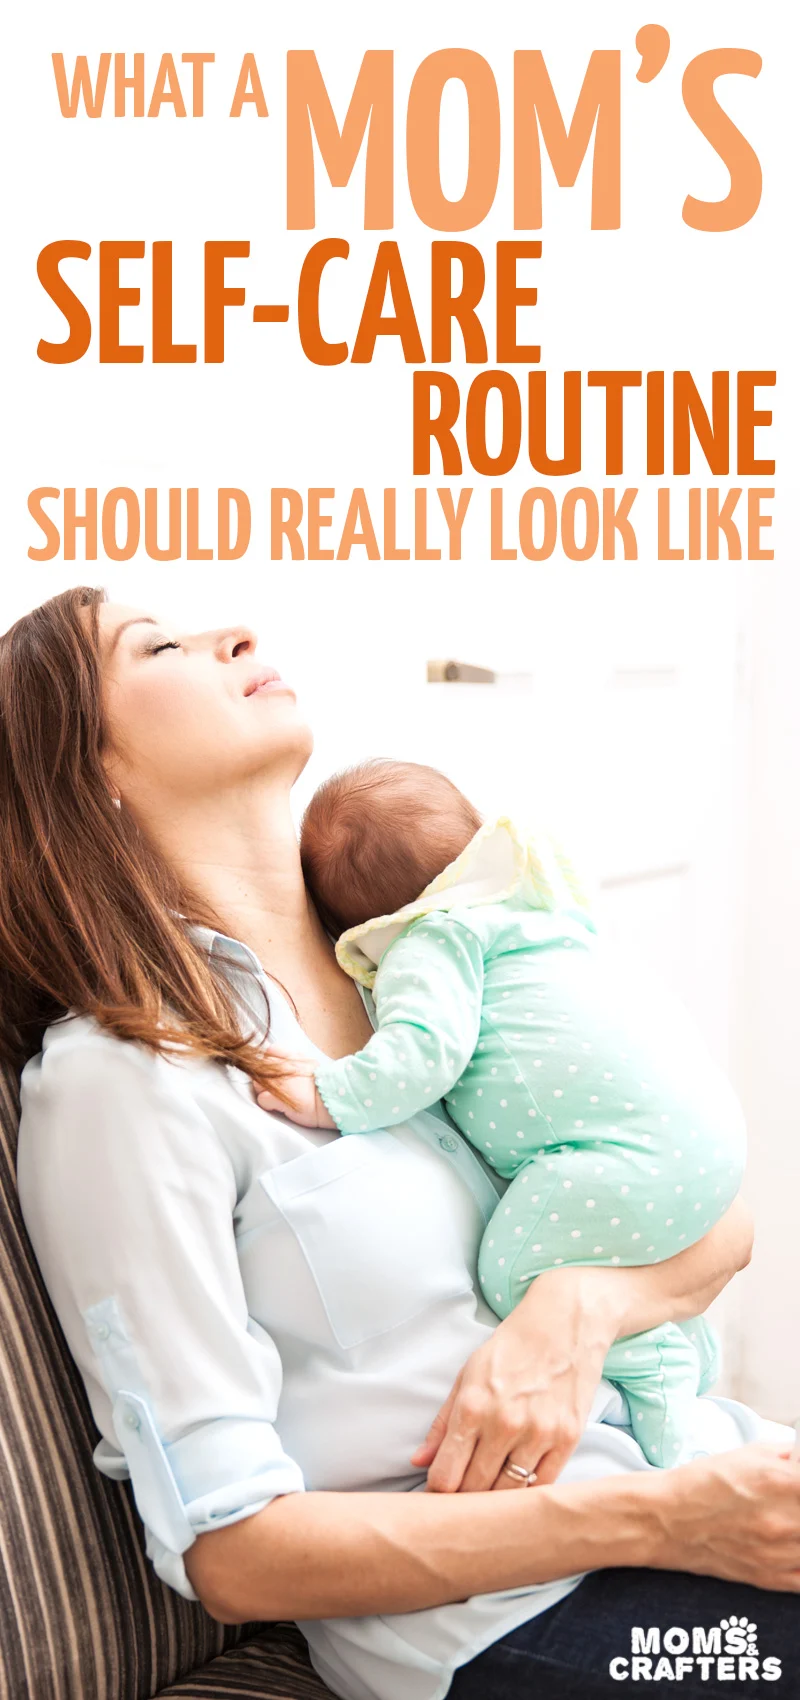 This is what can happen if you don't take care of yourself - it can get more serious than you think! And self-care for moms might not be what you think it is. Click to find out what that looks like, how mothers should treat themselves and how it'll make you a better parent. #parentingtips #selfcare #motherhood